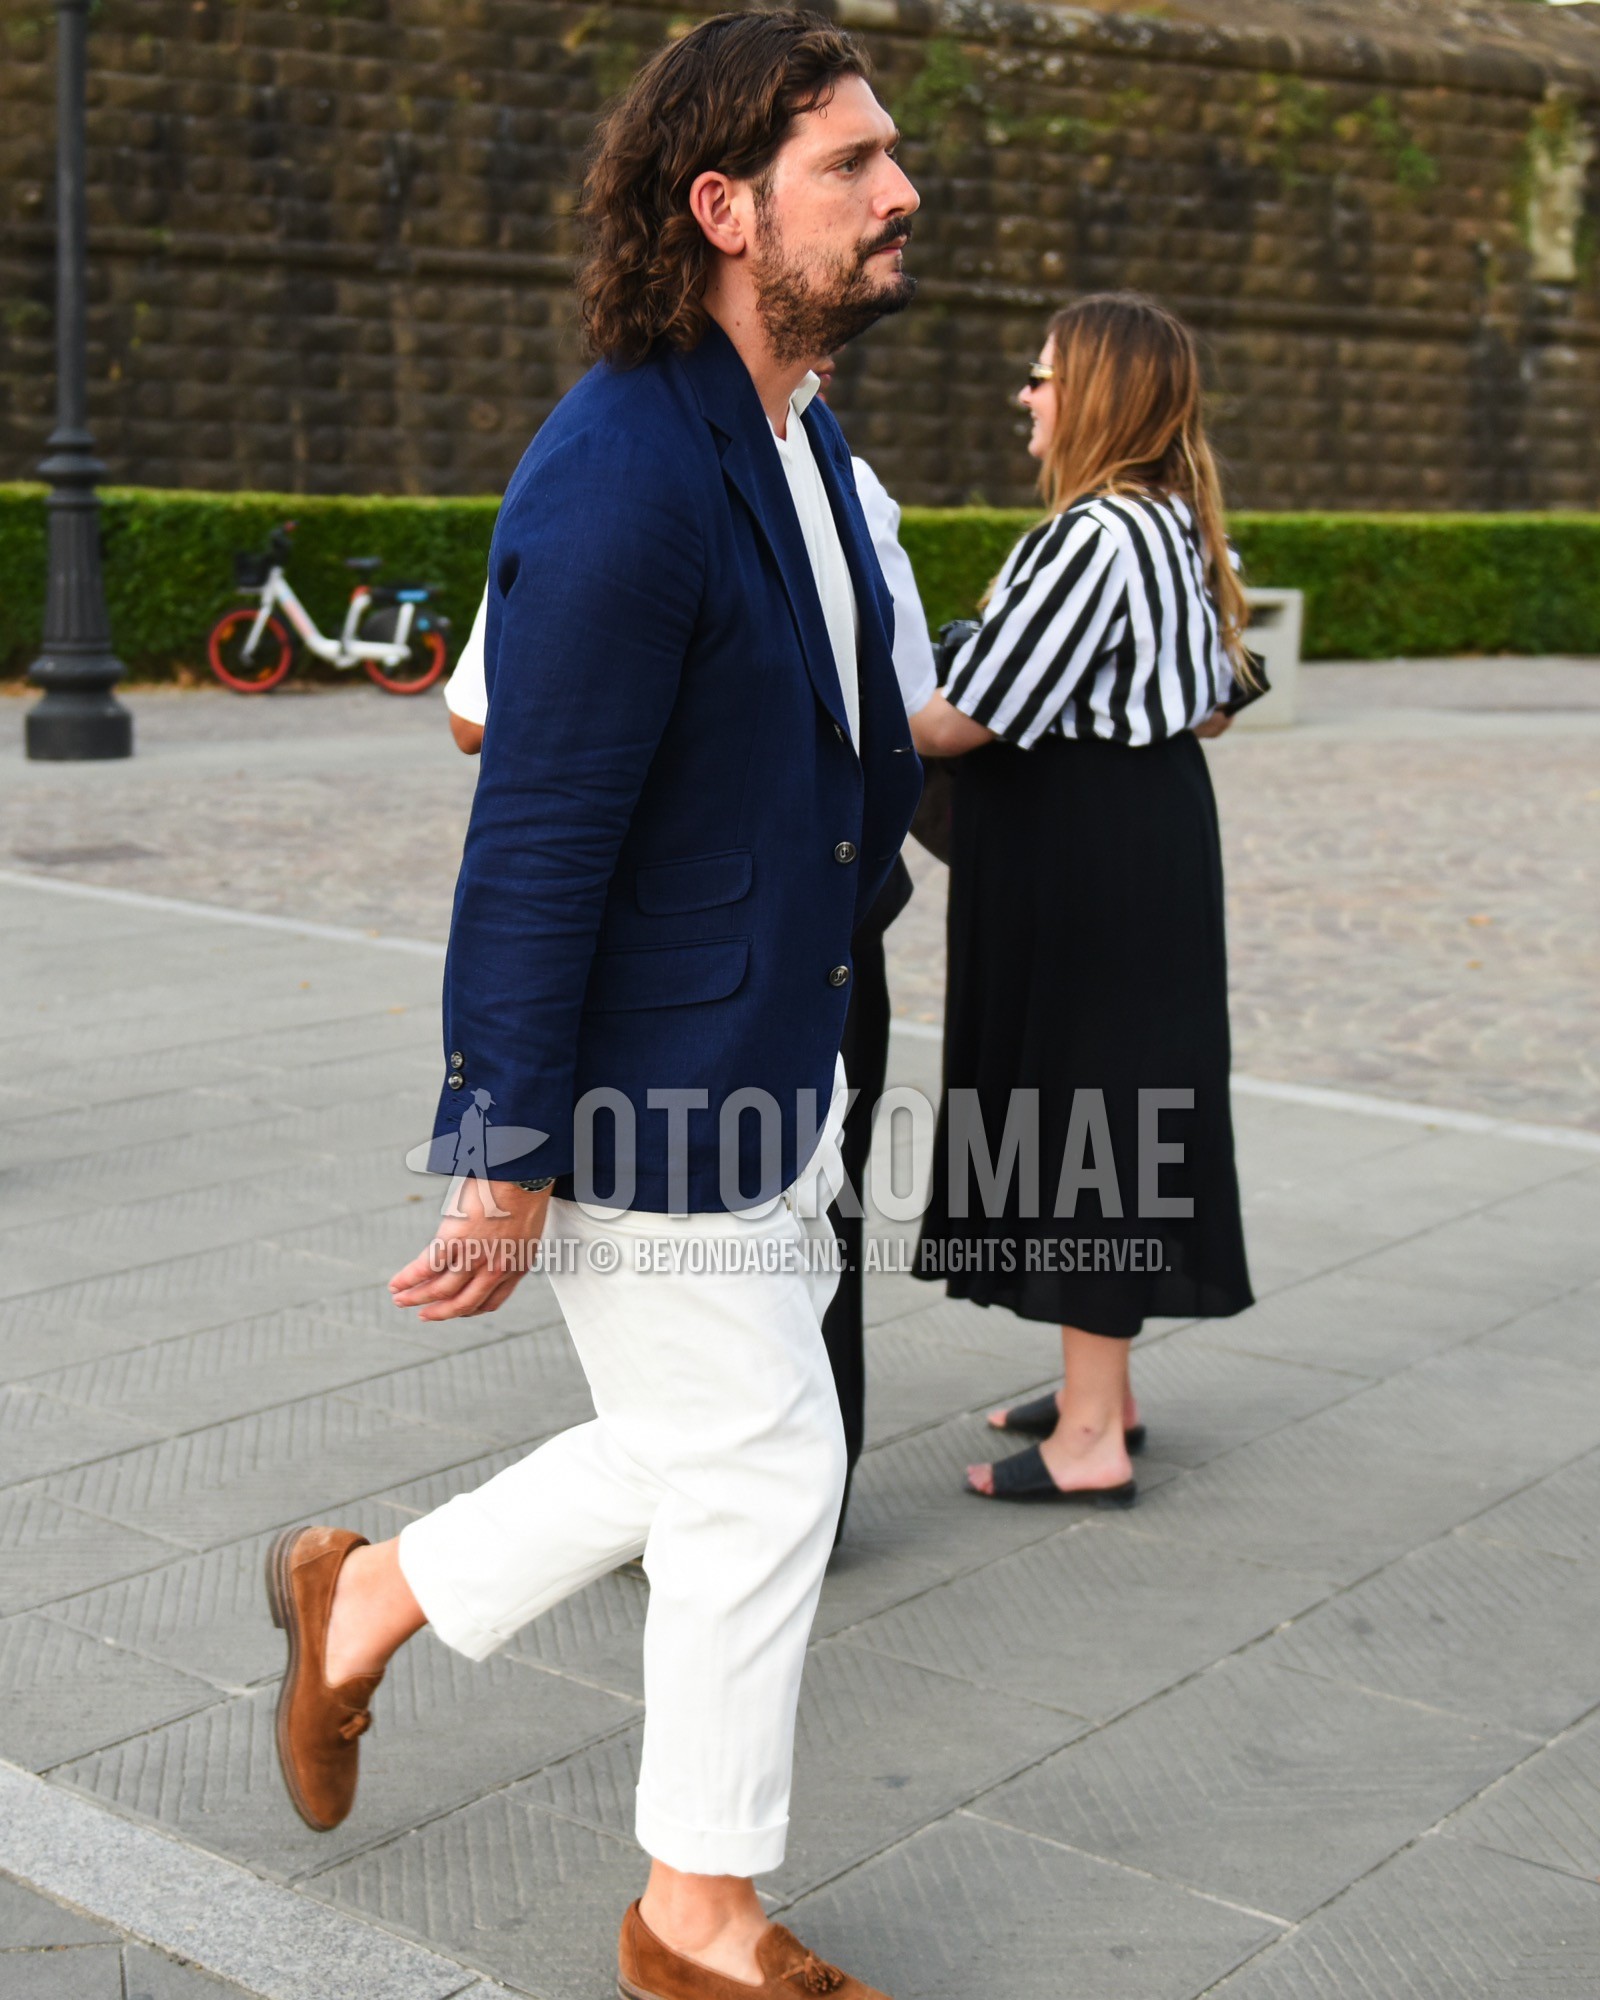 Men's spring summer outfit with navy plain tailored jacket, white plain t-shirt, white plain slacks, brown tassel loafers leather shoes.